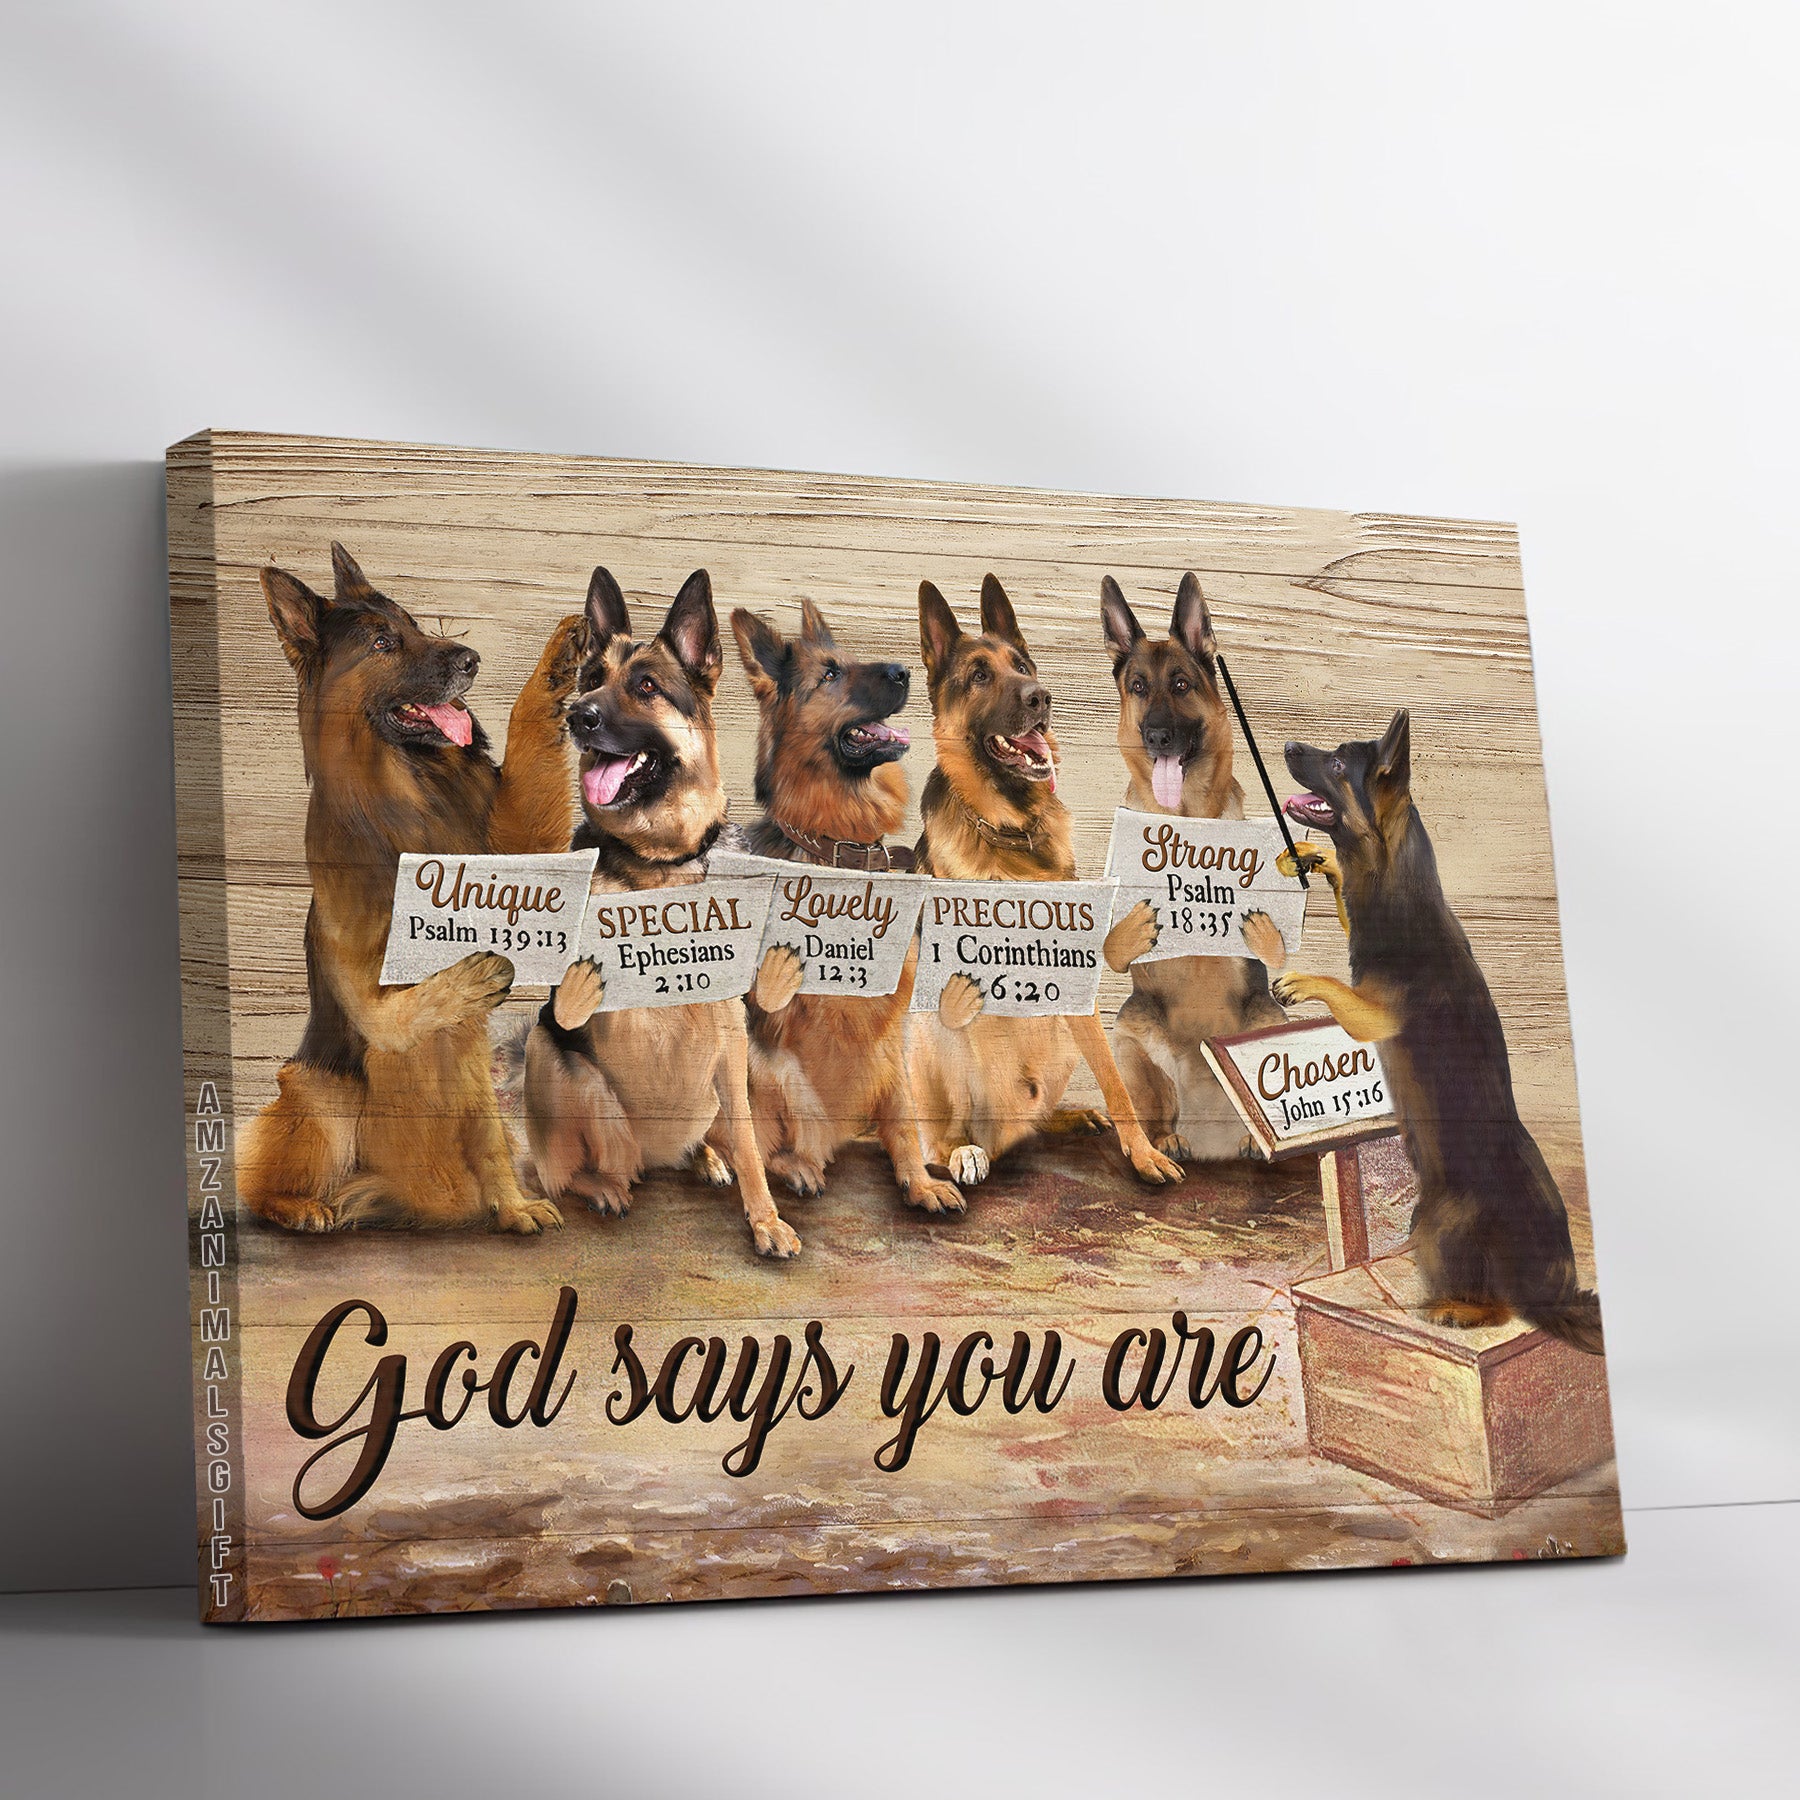 German Shepherd & Jesus Premium Wrapped Landscape Canvas - German Shepherd, Dog Painting, God Says You Are - Gift For Christian, Dog Lovers